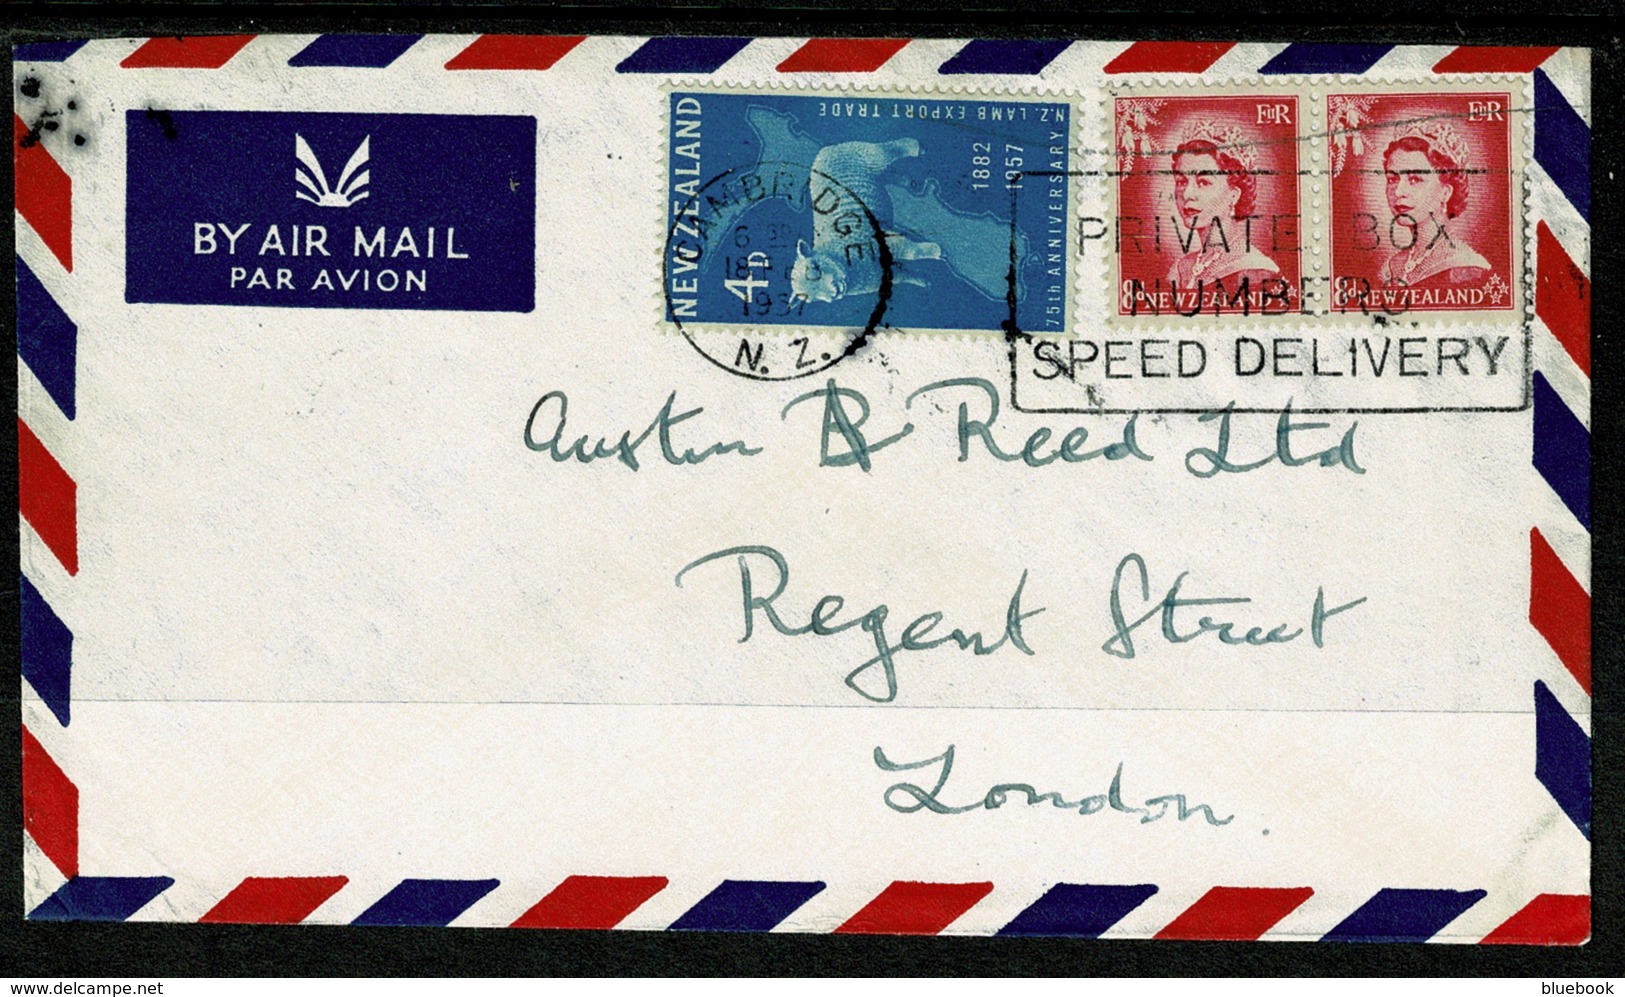 Ref 1240 - 1957 Airmail Cover 1/8 Rate? Cambridge New Zealand To London - Lettres & Documents